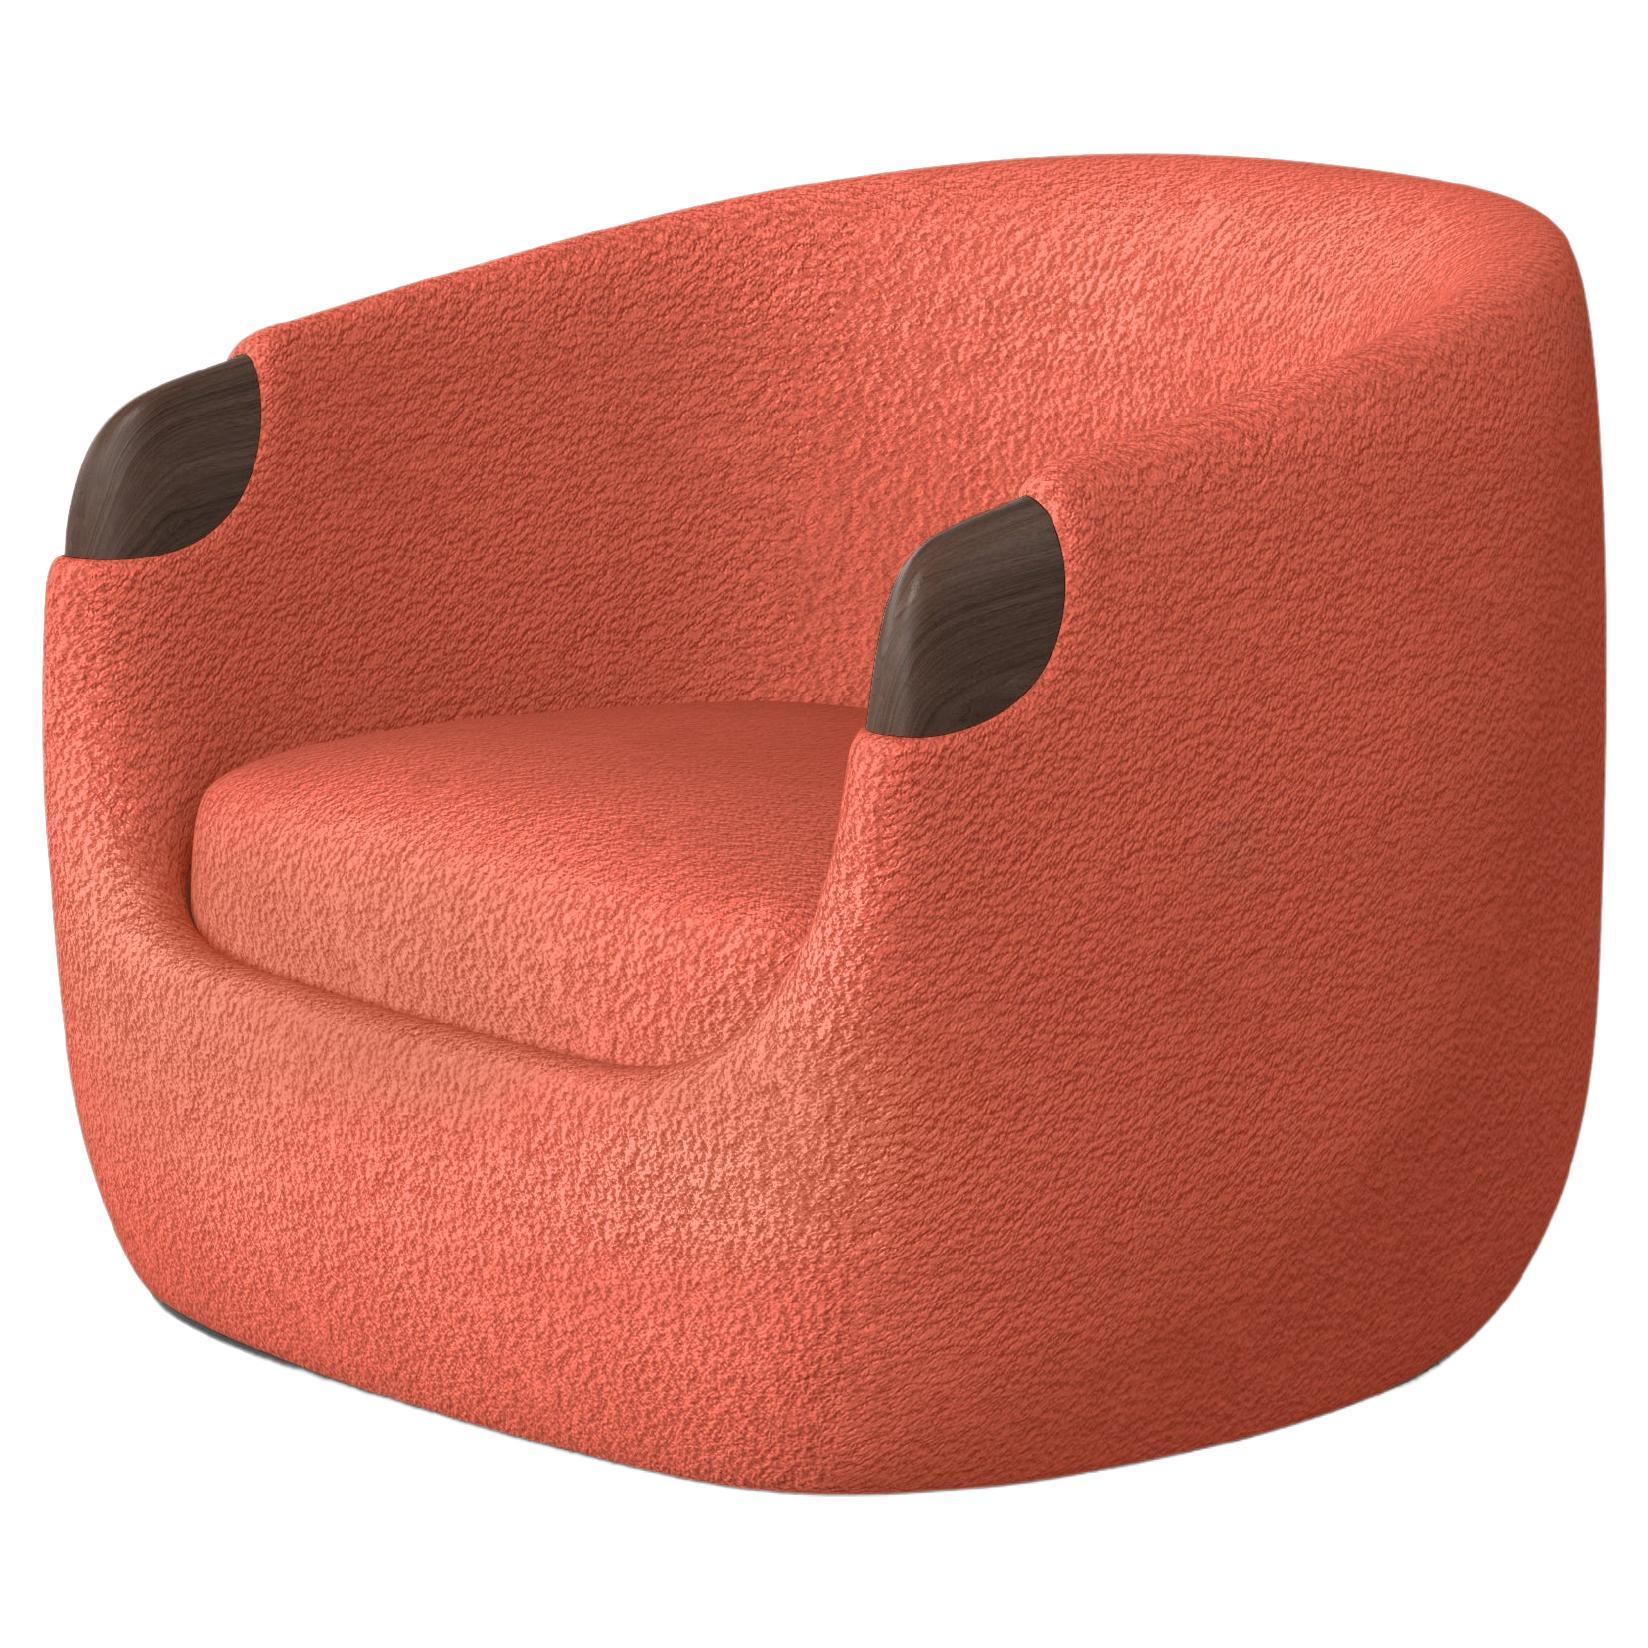 The Moderns Armchair in Salmon Boucle and Walnut (Fauteuil bulle moderne en saumon et noyer)